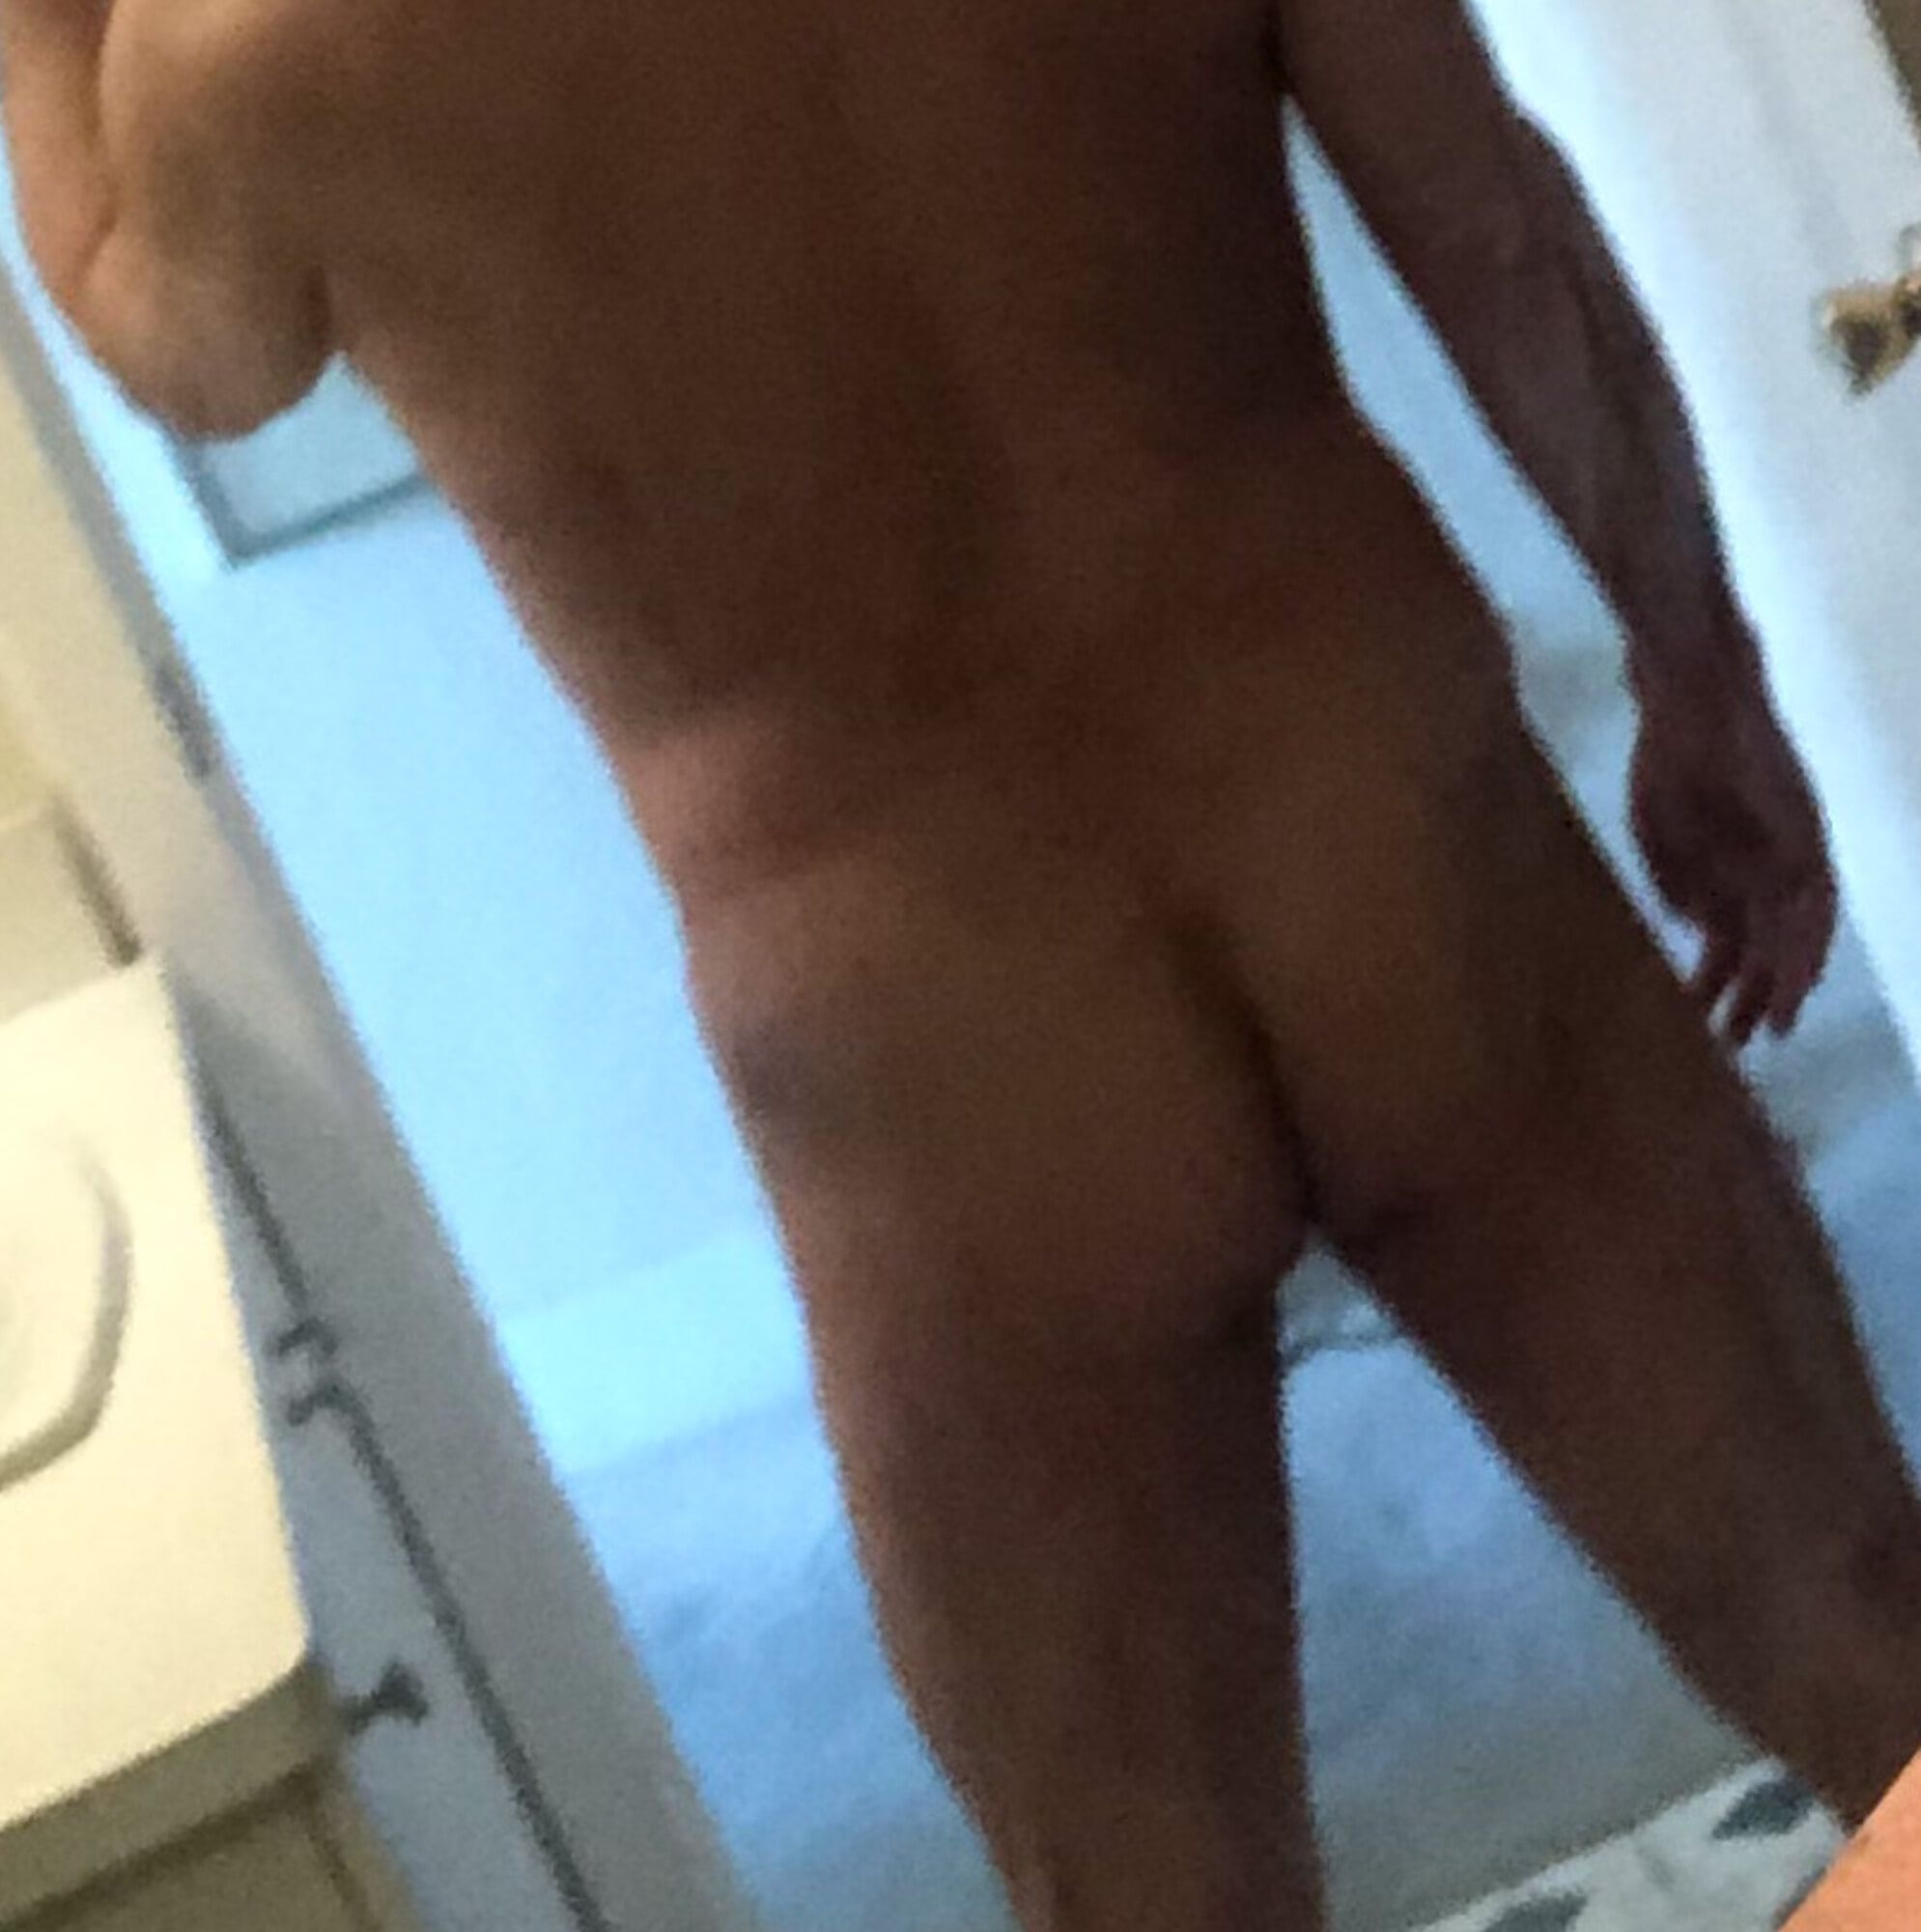 Some Ass & Dick for the Holidays! #2